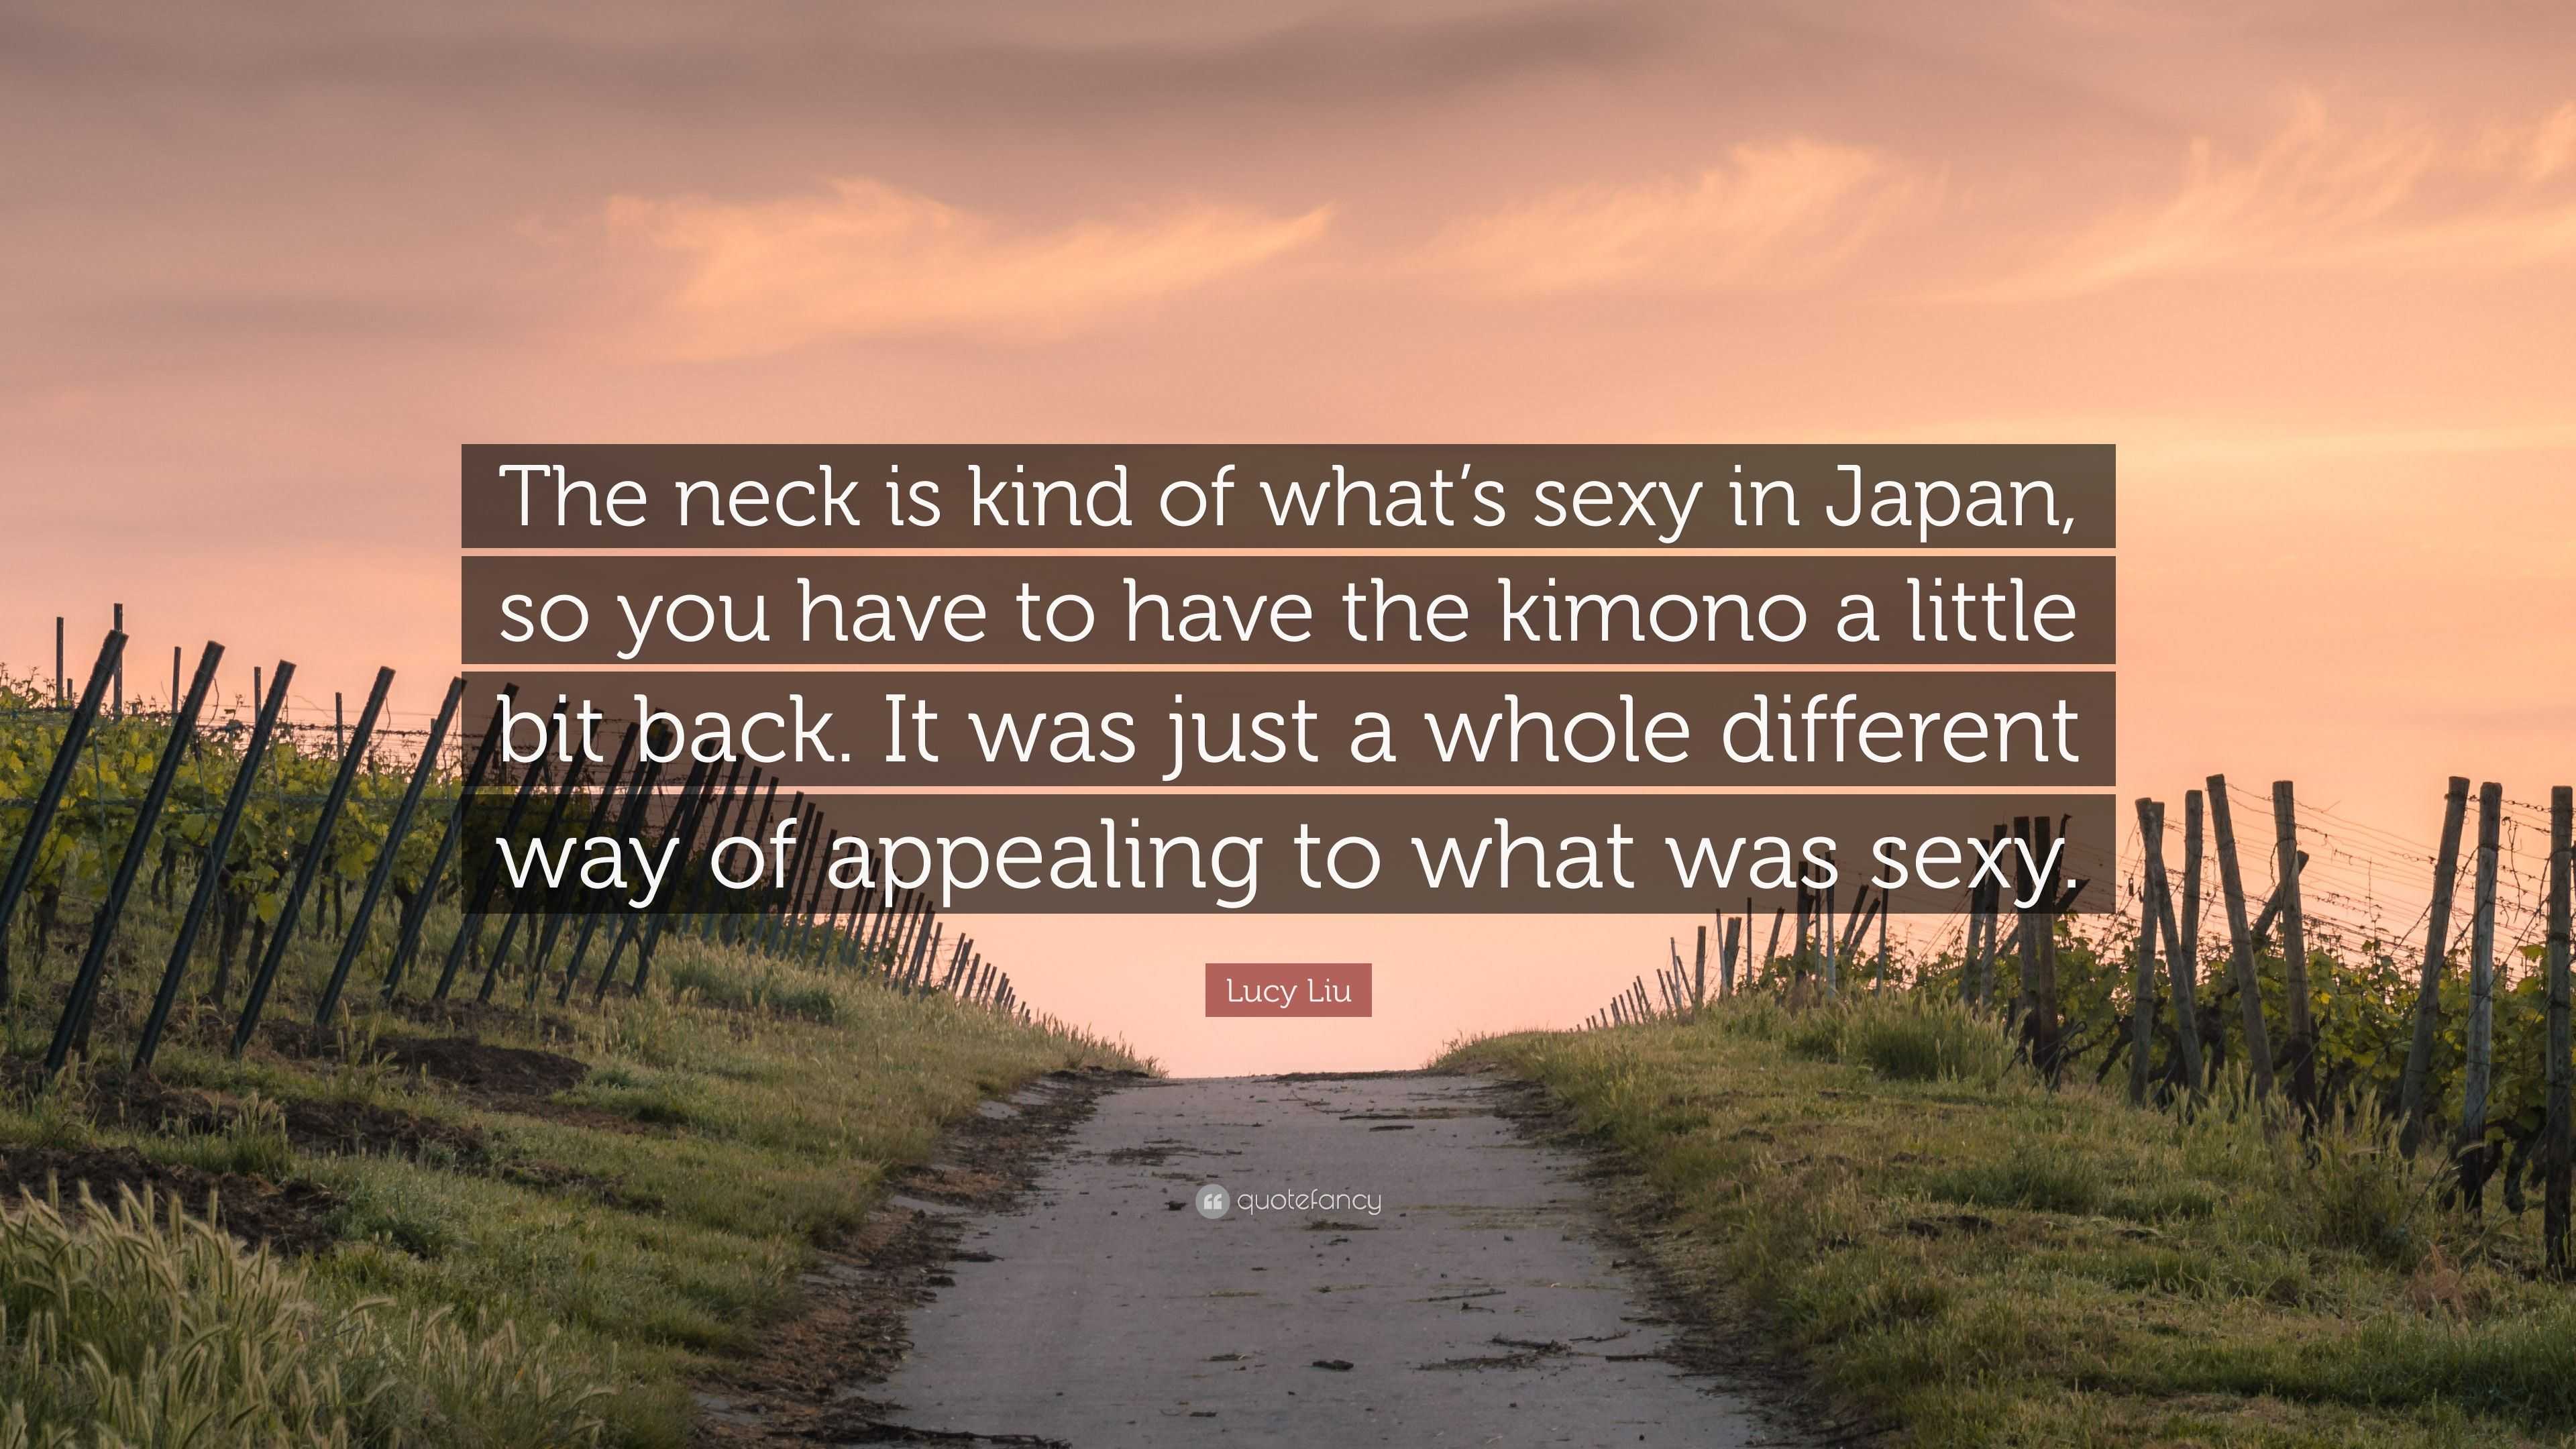 Lucy Liu Quote The Neck Is Kind Of What S Sexy In Japan So You Have To Have The Kimono A Little Bit Back It Was Just A Whole Differen